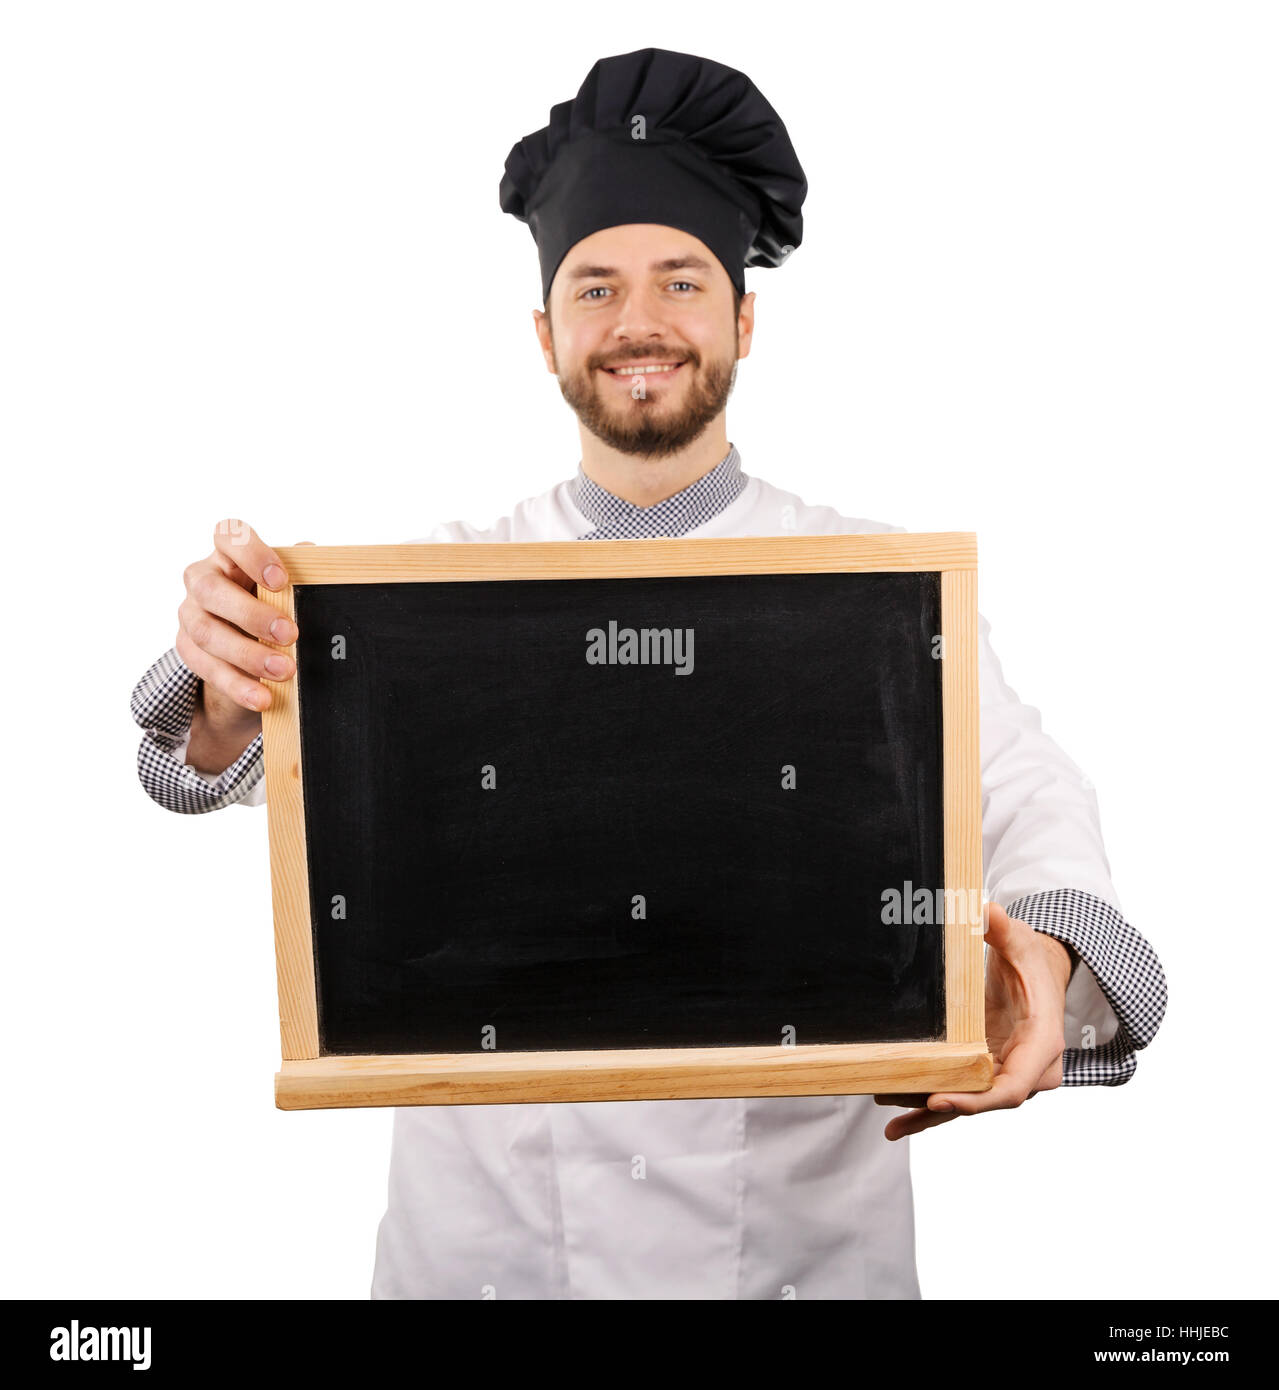 smiling chef holding blank blackboard in front Stock Photo